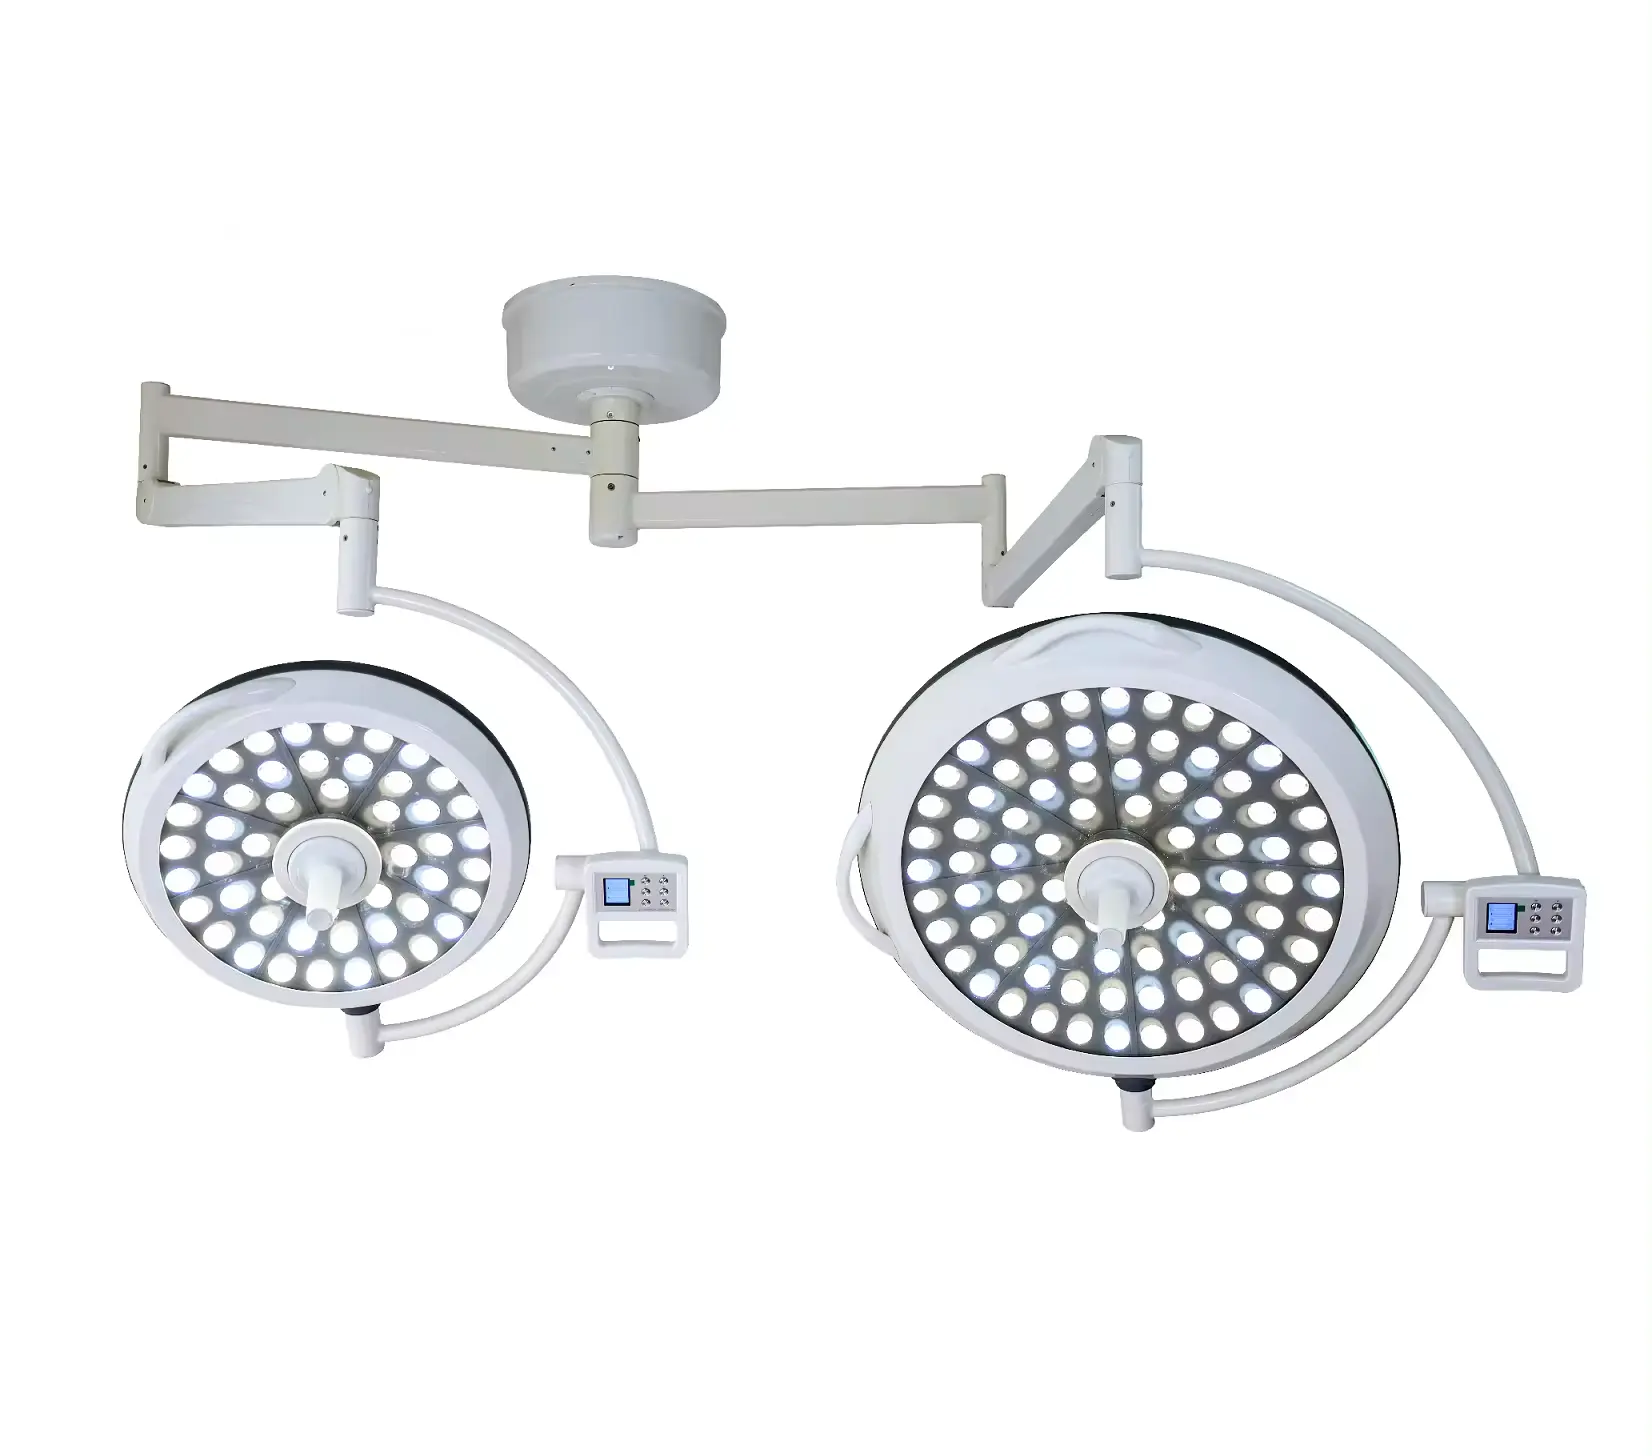 Factory price of 700/700 700/500 Ceiling Double Dome Shadowless Operating Lamps LED Surgical Light